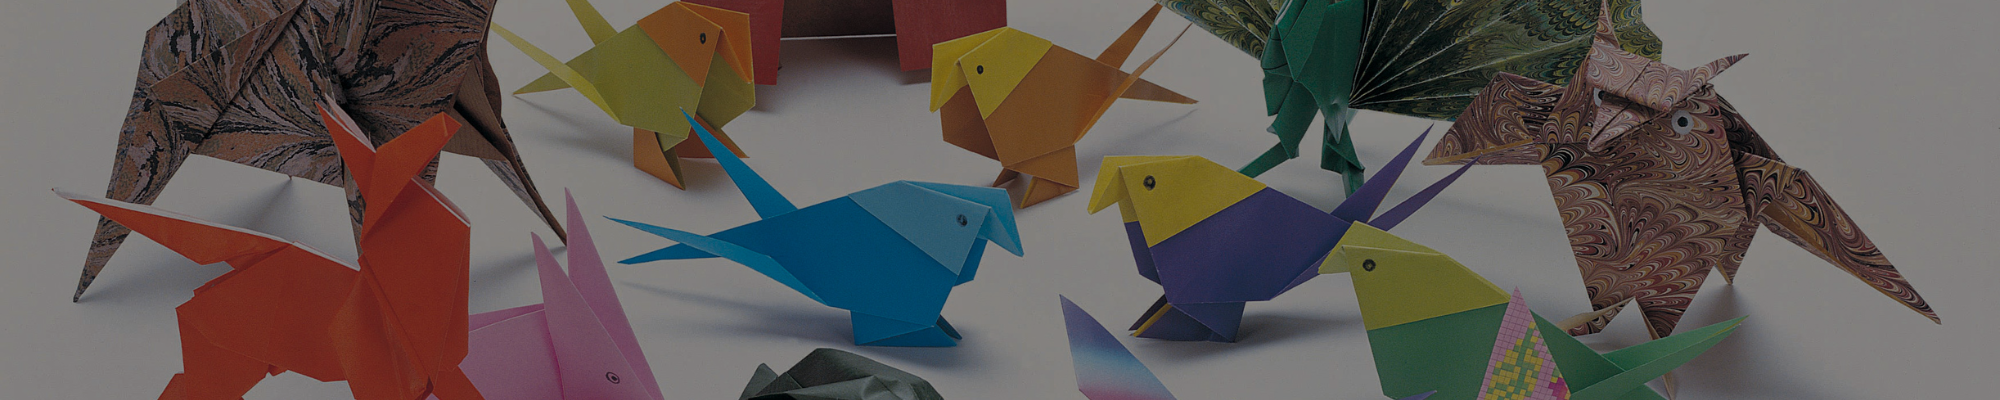 Image of different types of origami such as birds and other animals.